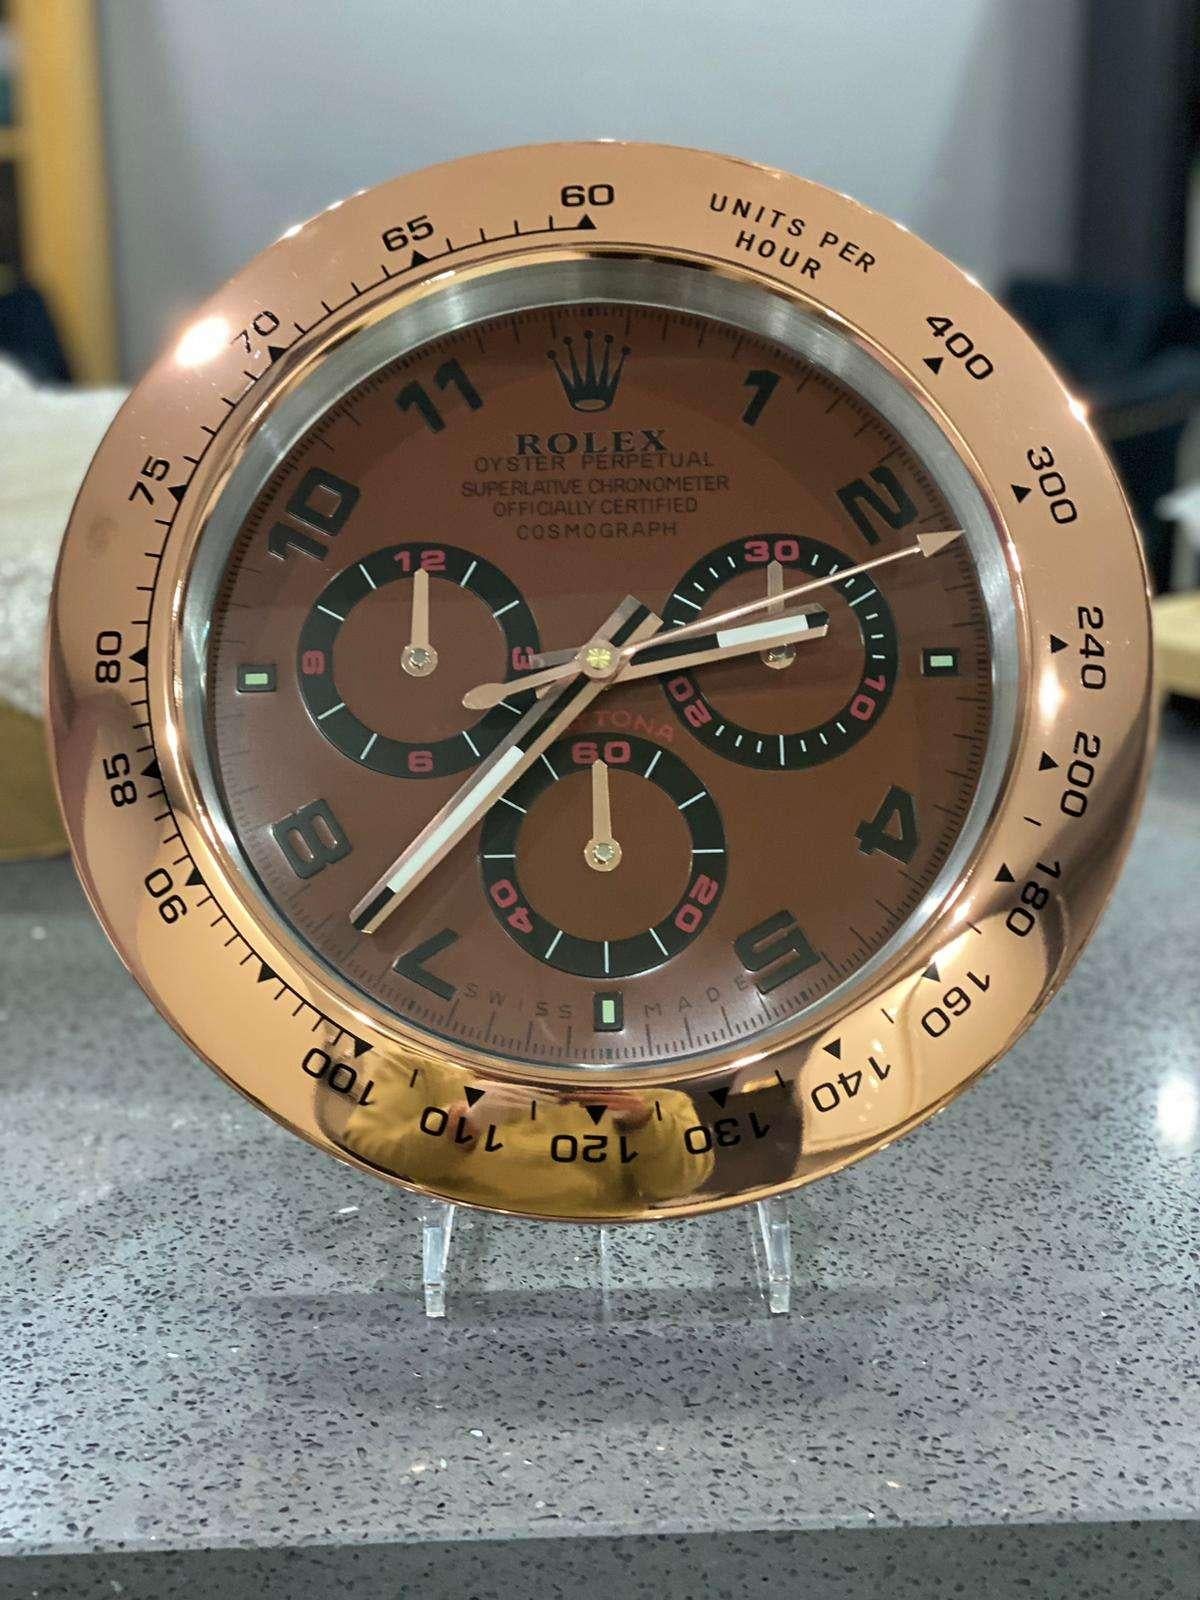 ROLEX Officially Certified Oyster Perpetual Rose Gold Chrome Wall Clock 
Good condition, working.
Lume strips Sweeping Quartz movement powered by single AA Battery.
Clock dimensions measure approximately 35cm by 5cm thickness
Free international